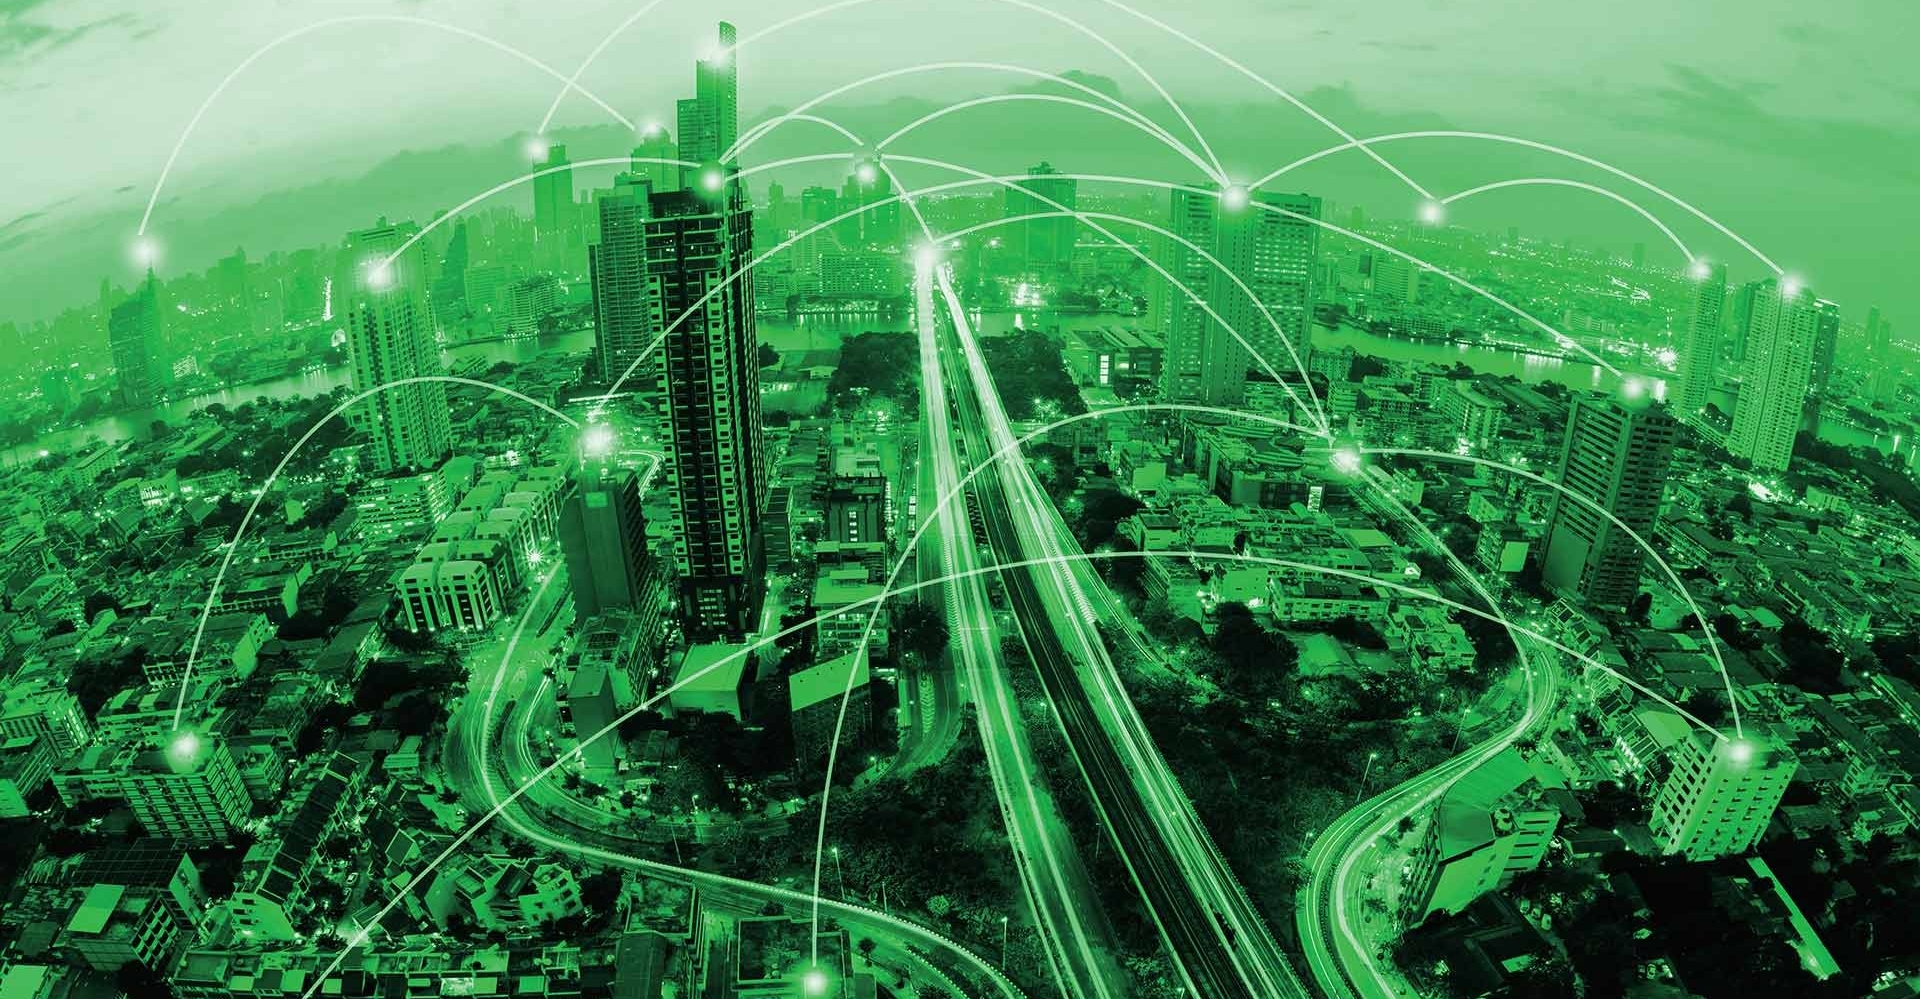 “We are challenging this top-down approach by asserting that smart cities are for all of us.”